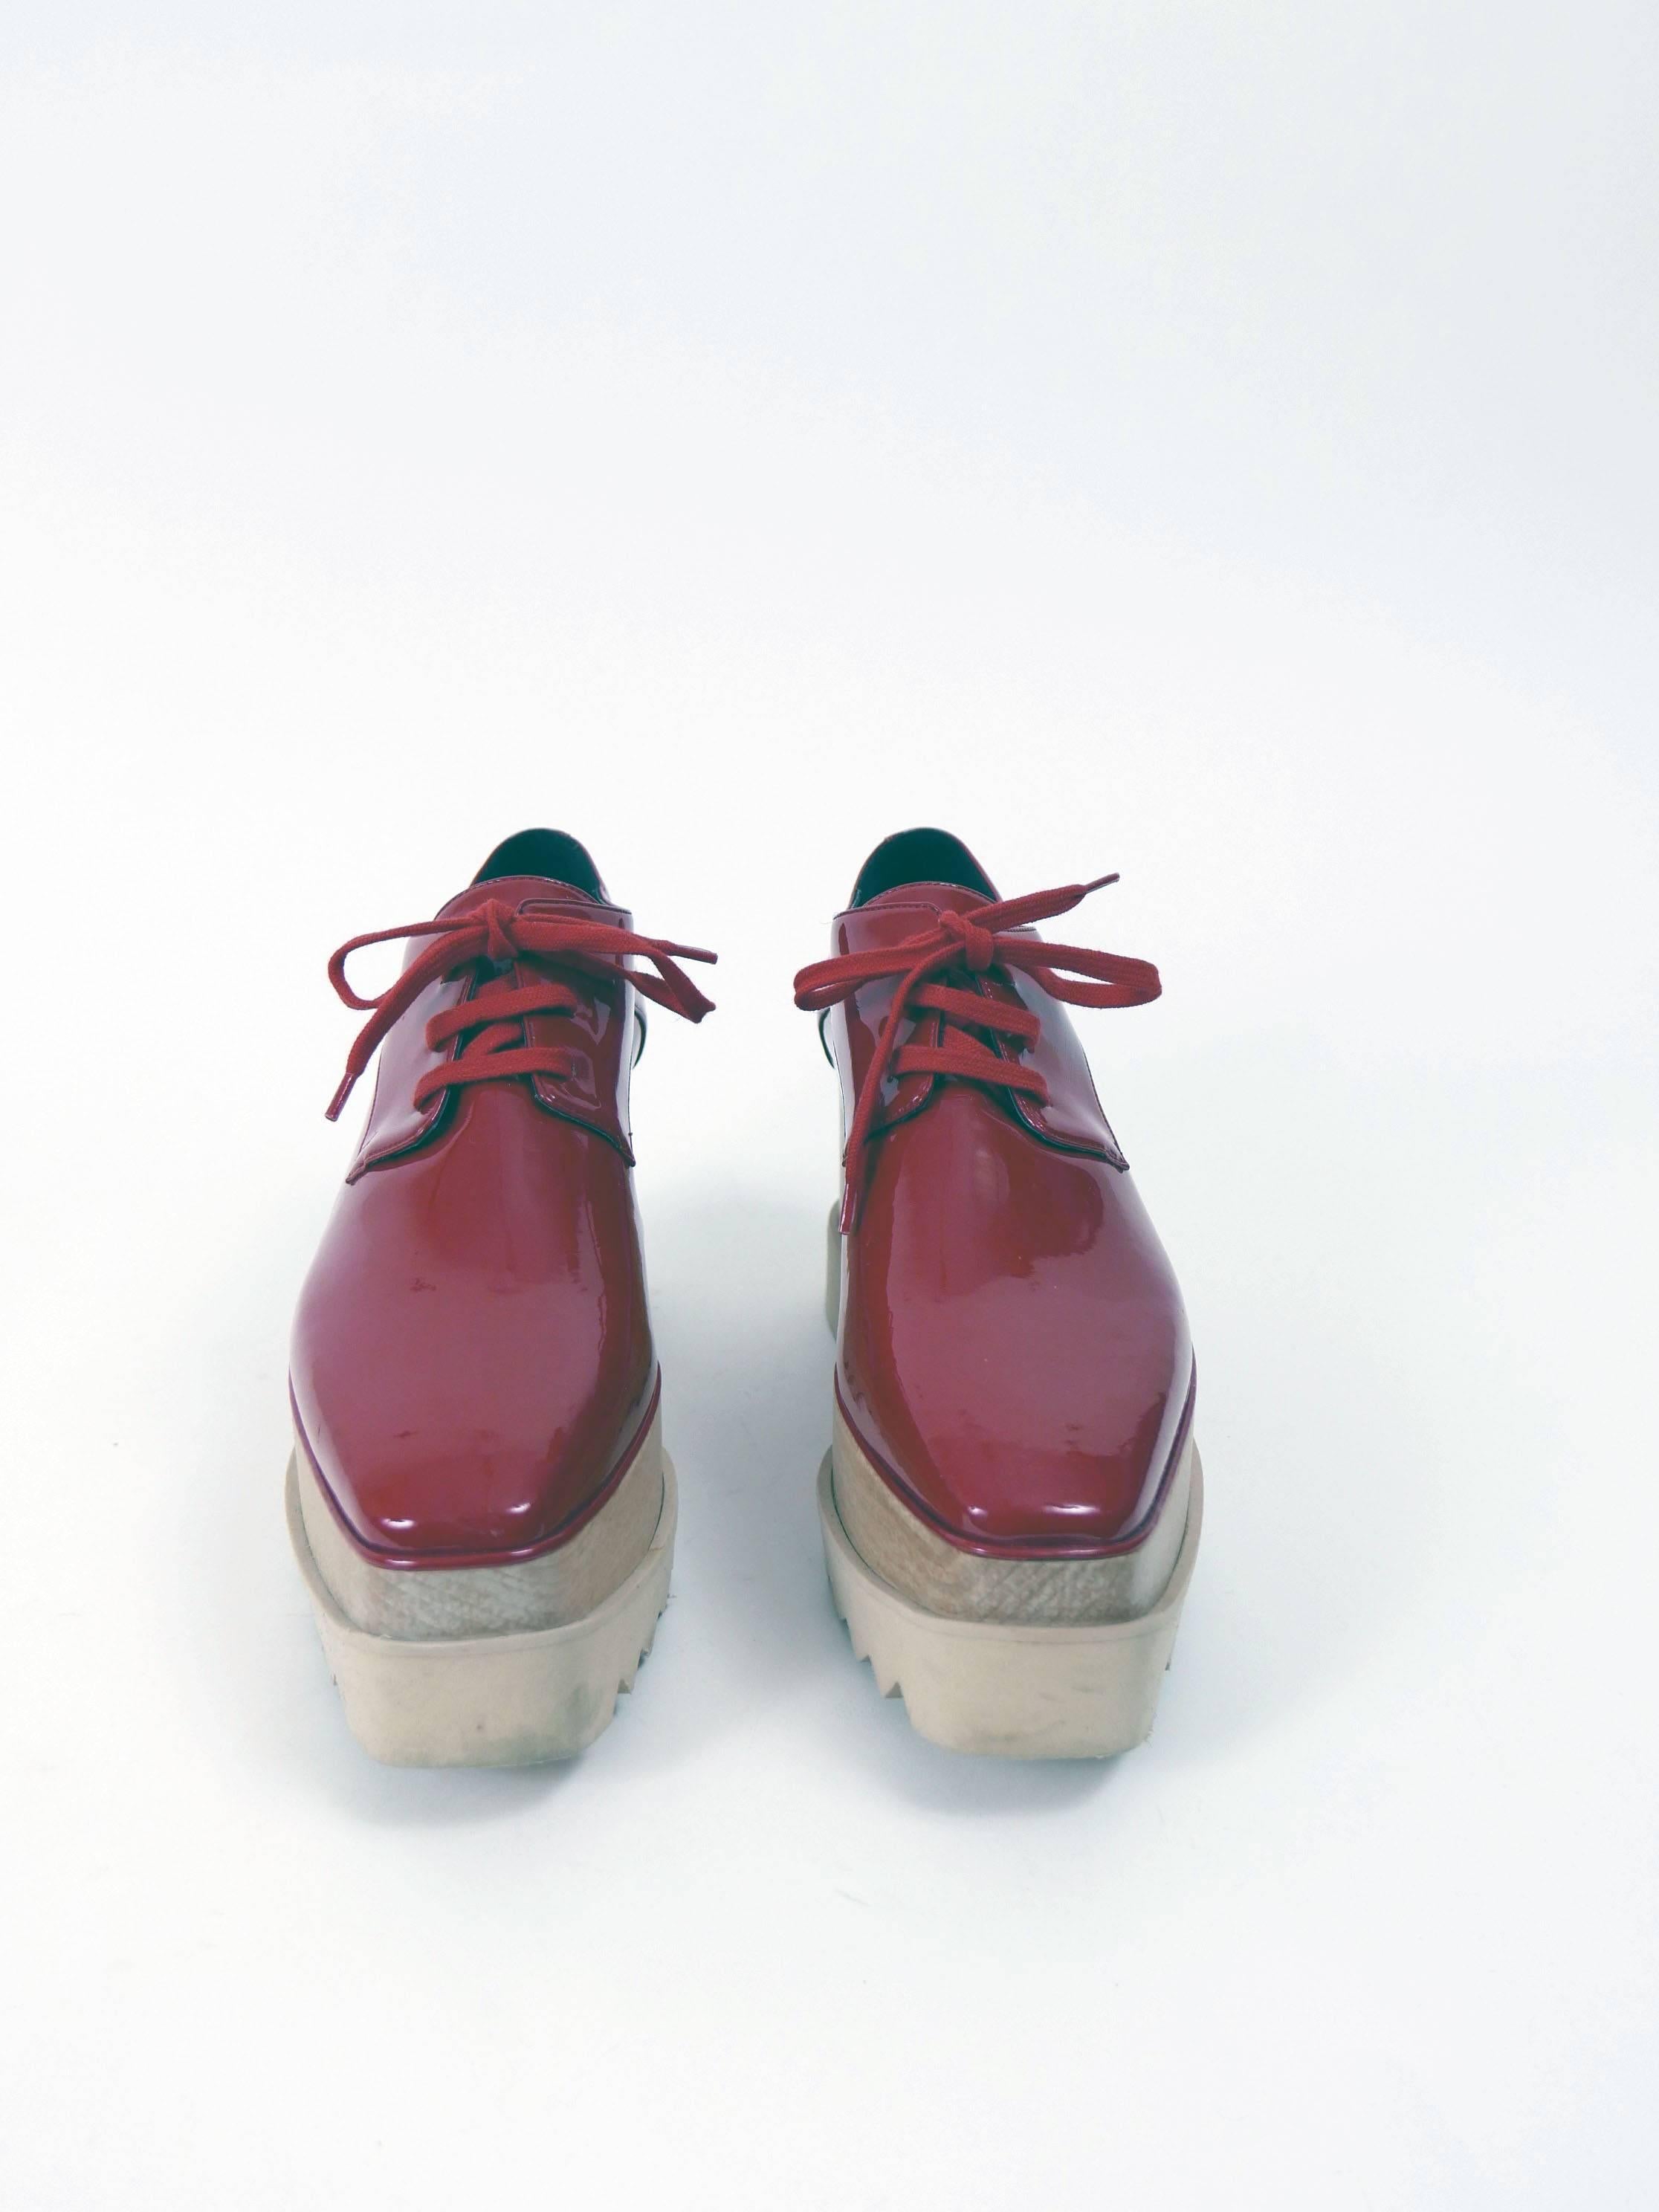 These gorgeous masculine-inspired lace-ups shoes are given the Stella McCartney touch with a sustainable wooden platform and a saw-edge rubber sole. The statement design is finished with a squared toe. 
Wear them in this gorgeous red hue to add